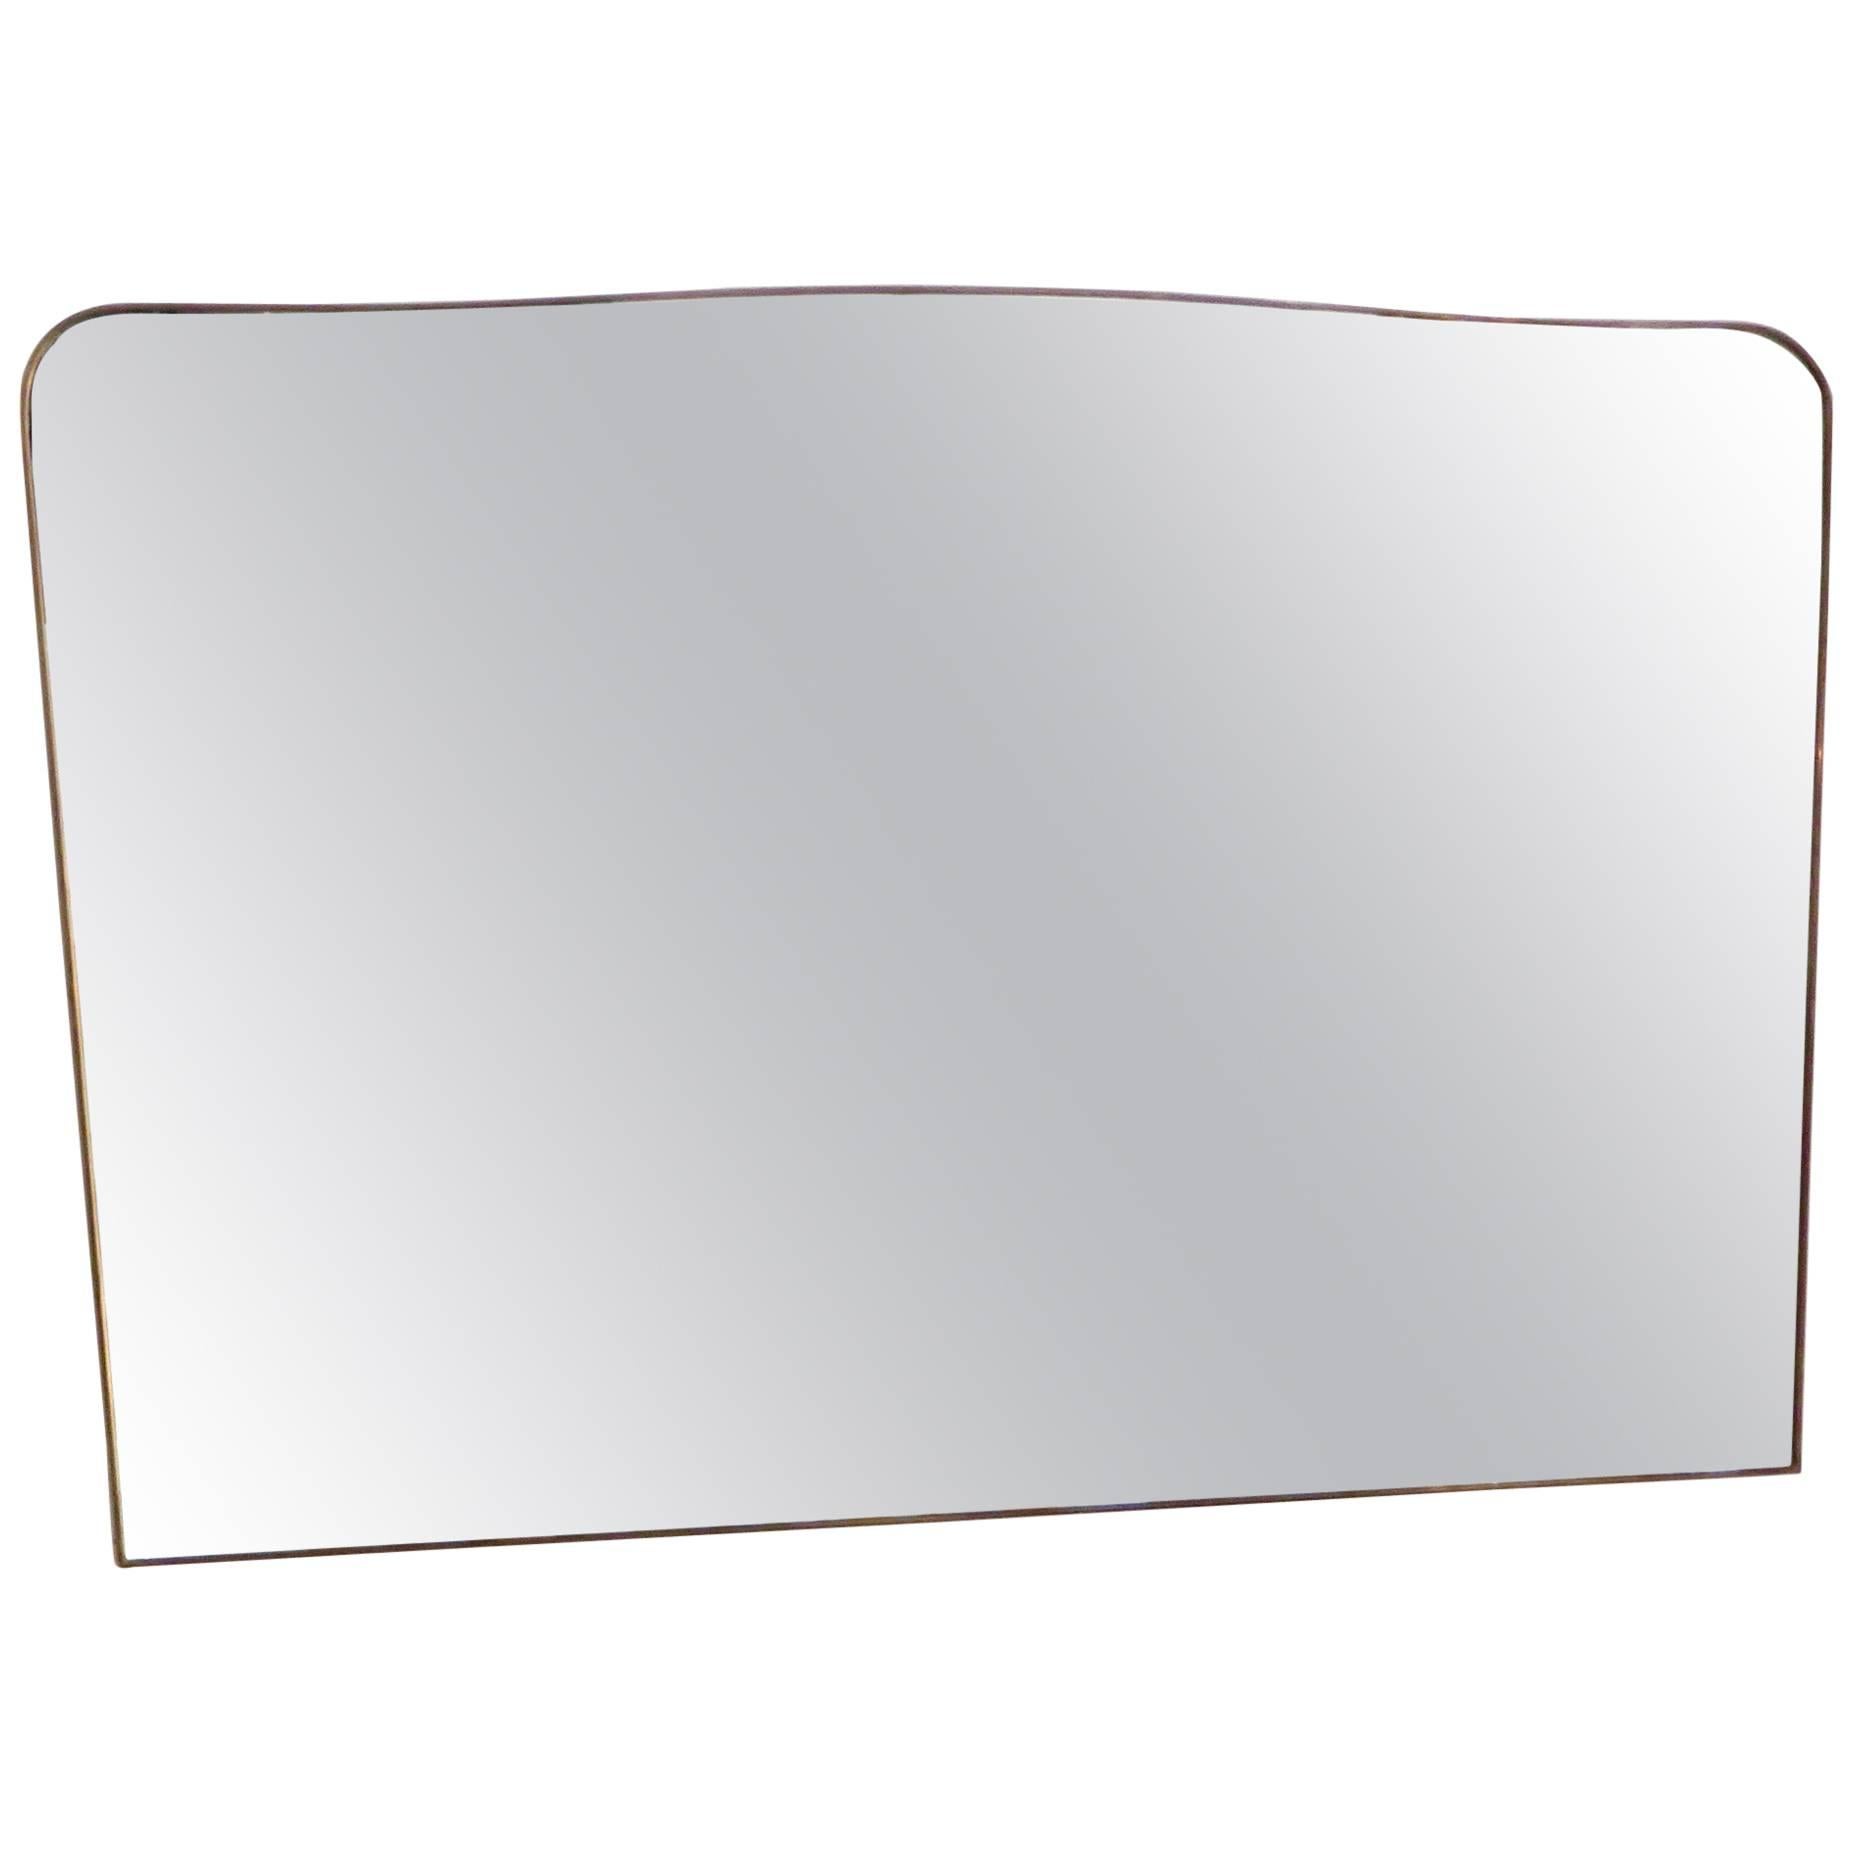 Monumental Italian Brass Framed Mirror With Curved Top